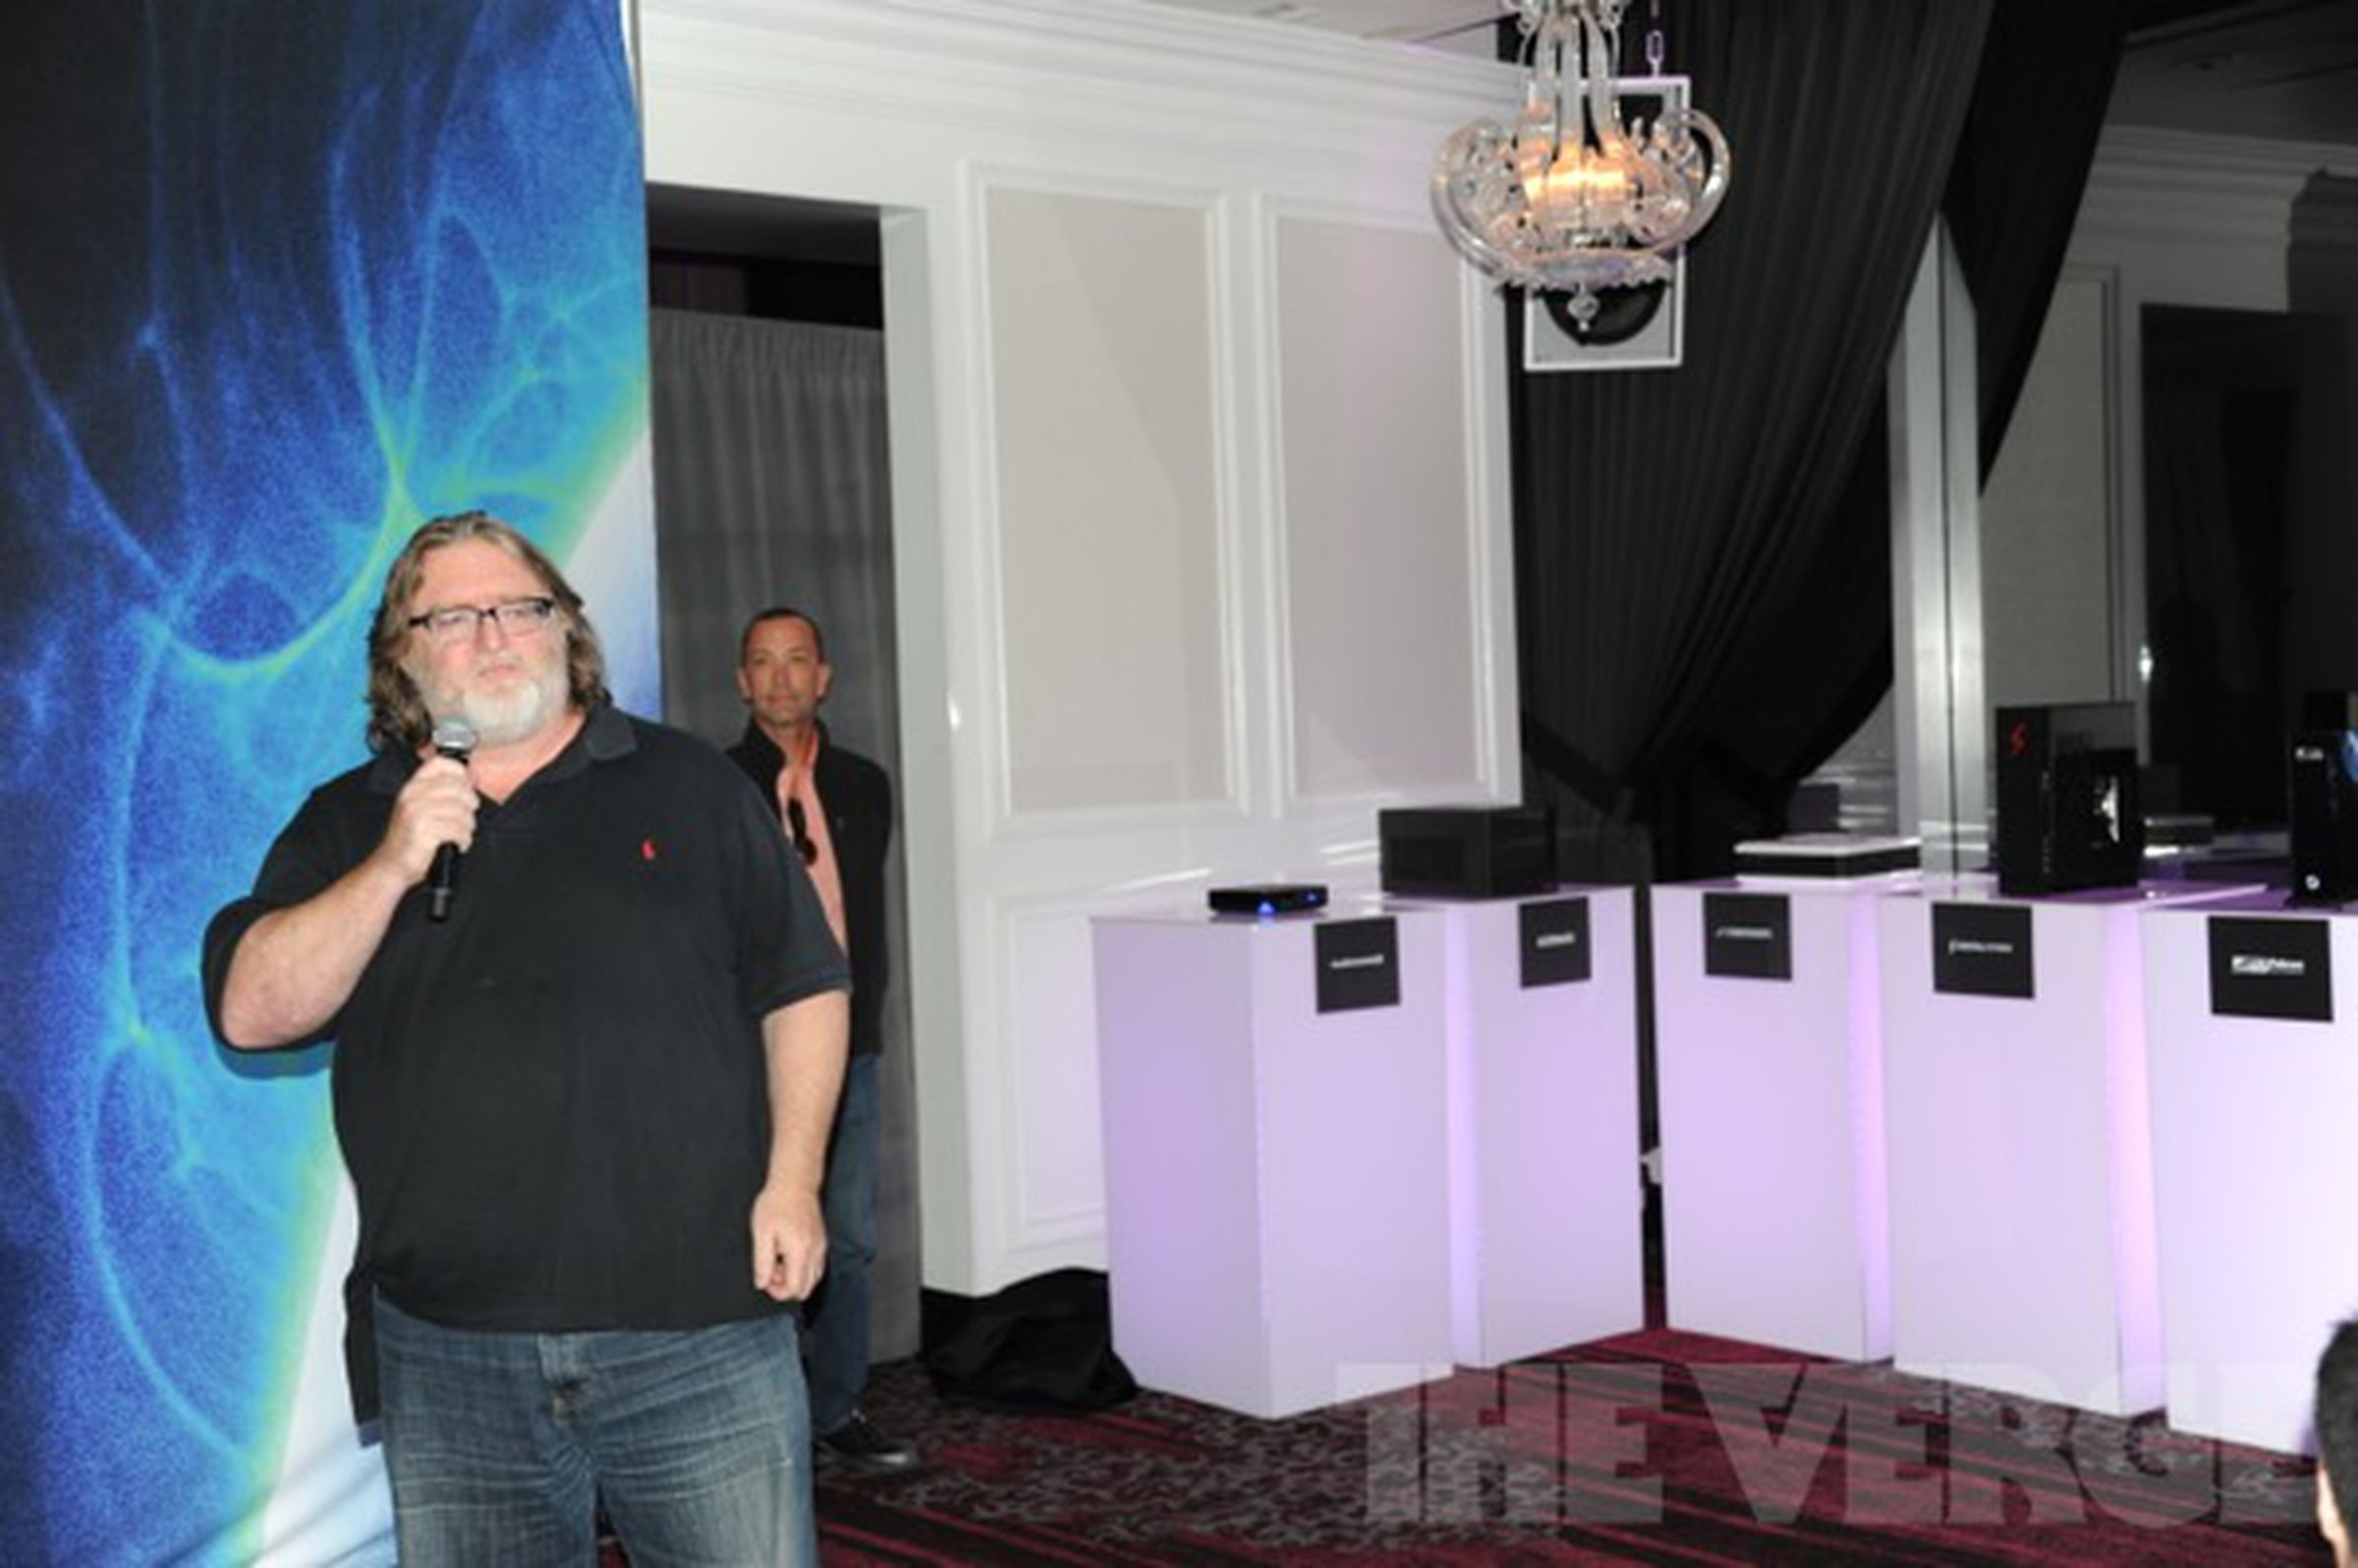 Photos of Valve's Steam Machines from its CES 2014 press conference